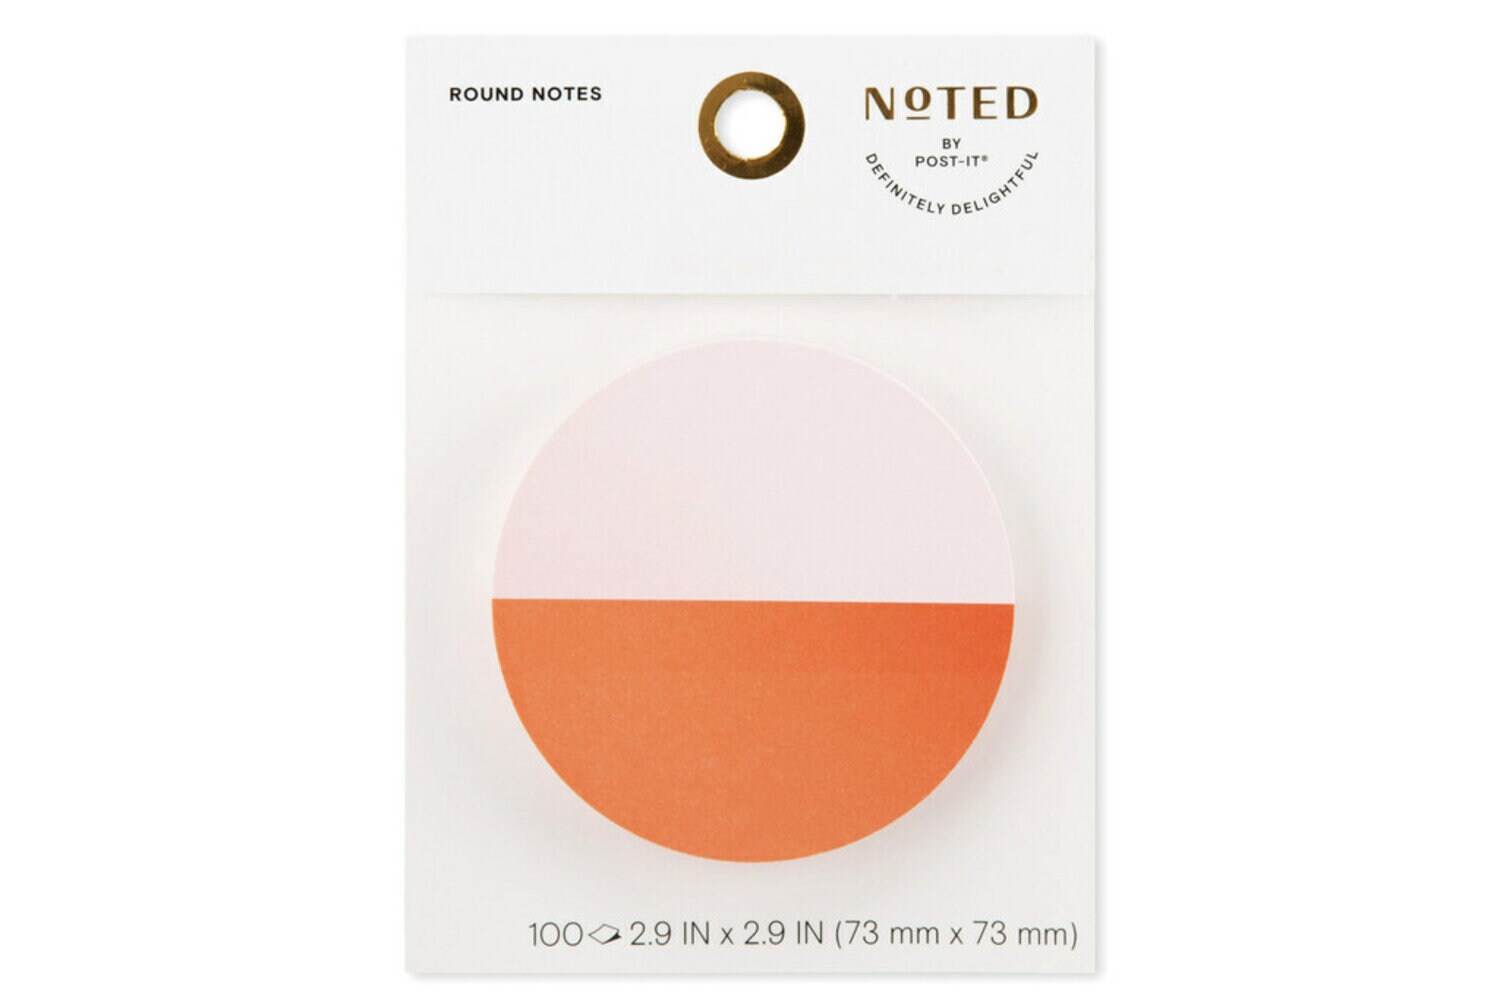 7100256634 - Post-it Printed Notes NTD-3RD-PO, 2.9 in x 2.9 in (73 mm x 73 mm)